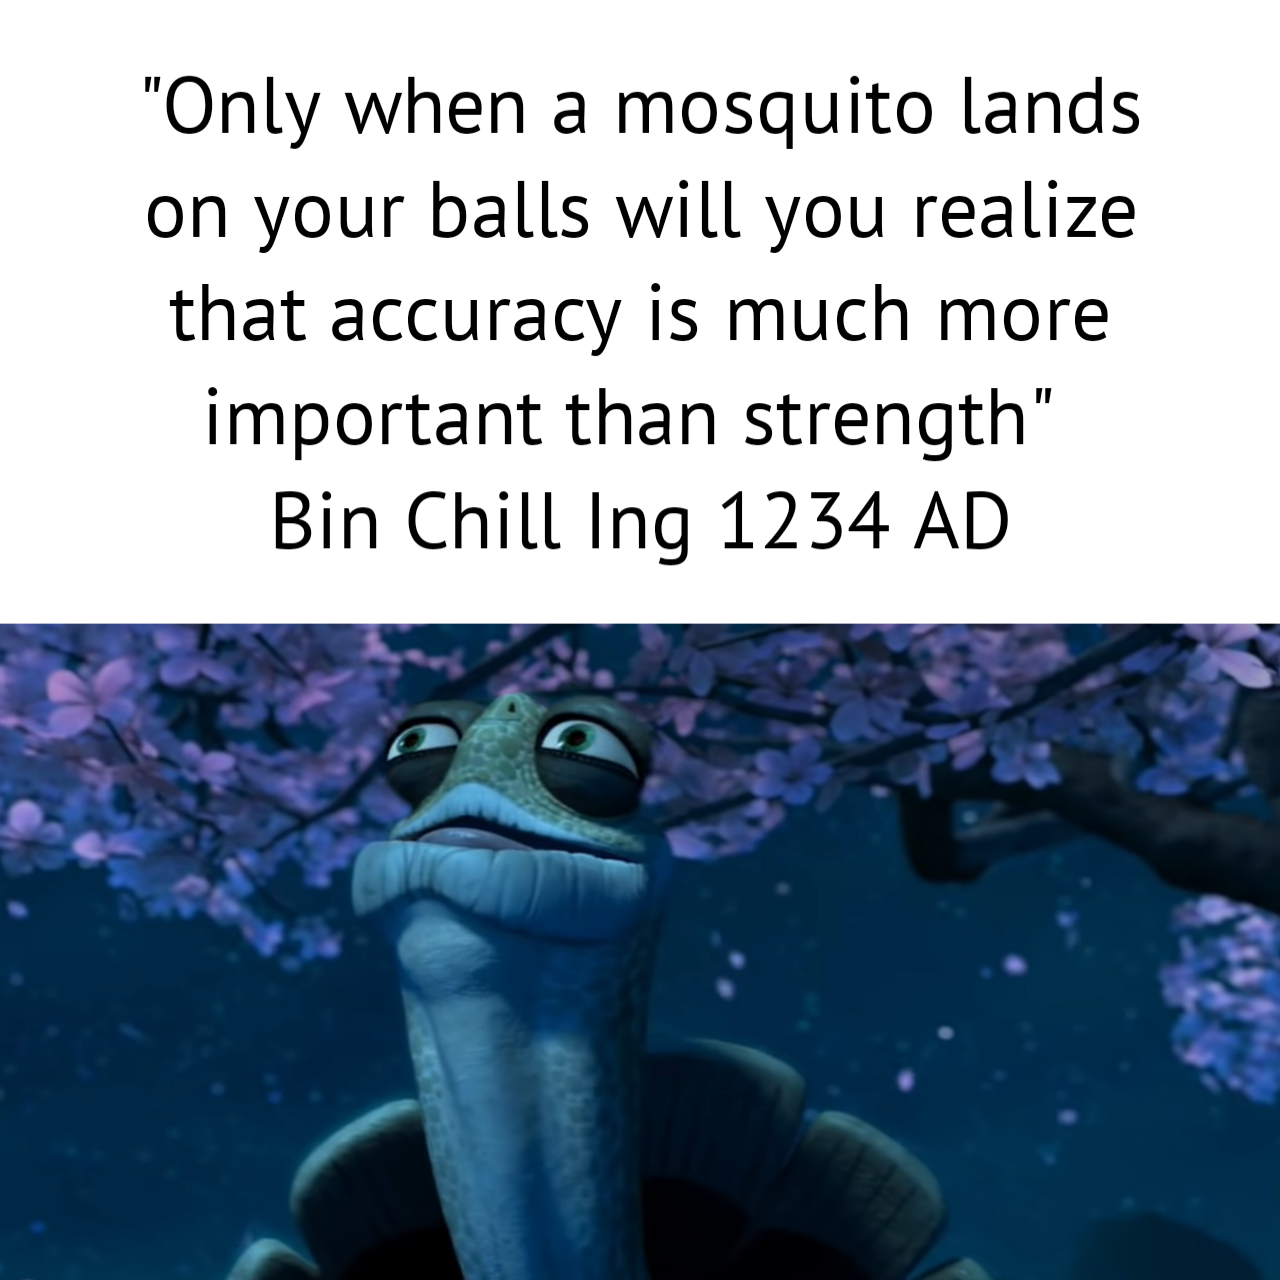 "Only when a mosquito lands on your balls will you realize that accuracy is much more important than strength" Bin Chill Ing 1234 Ad